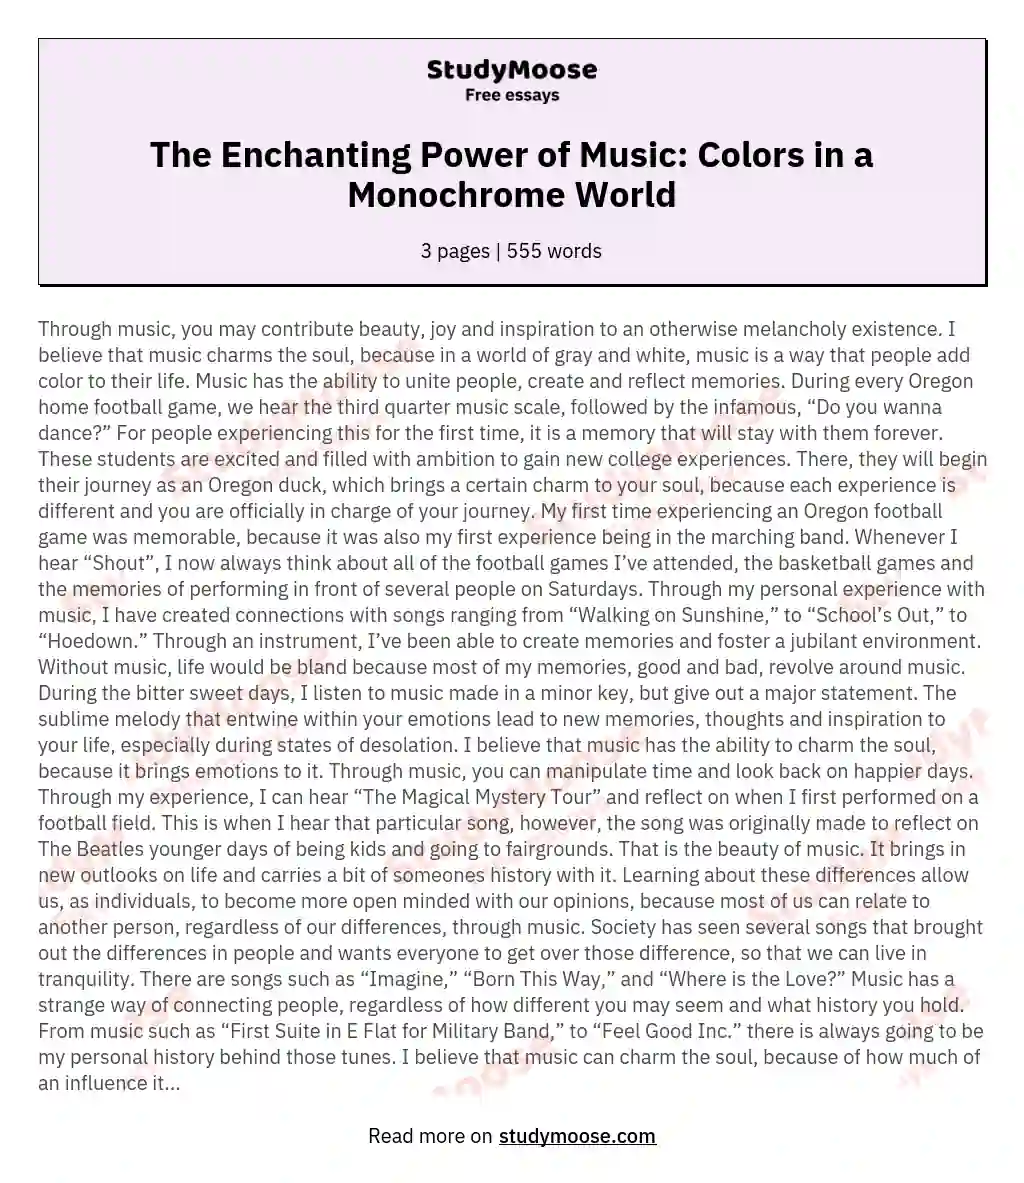 The Enchanting Power of Music: Colors in a Monochrome World essay